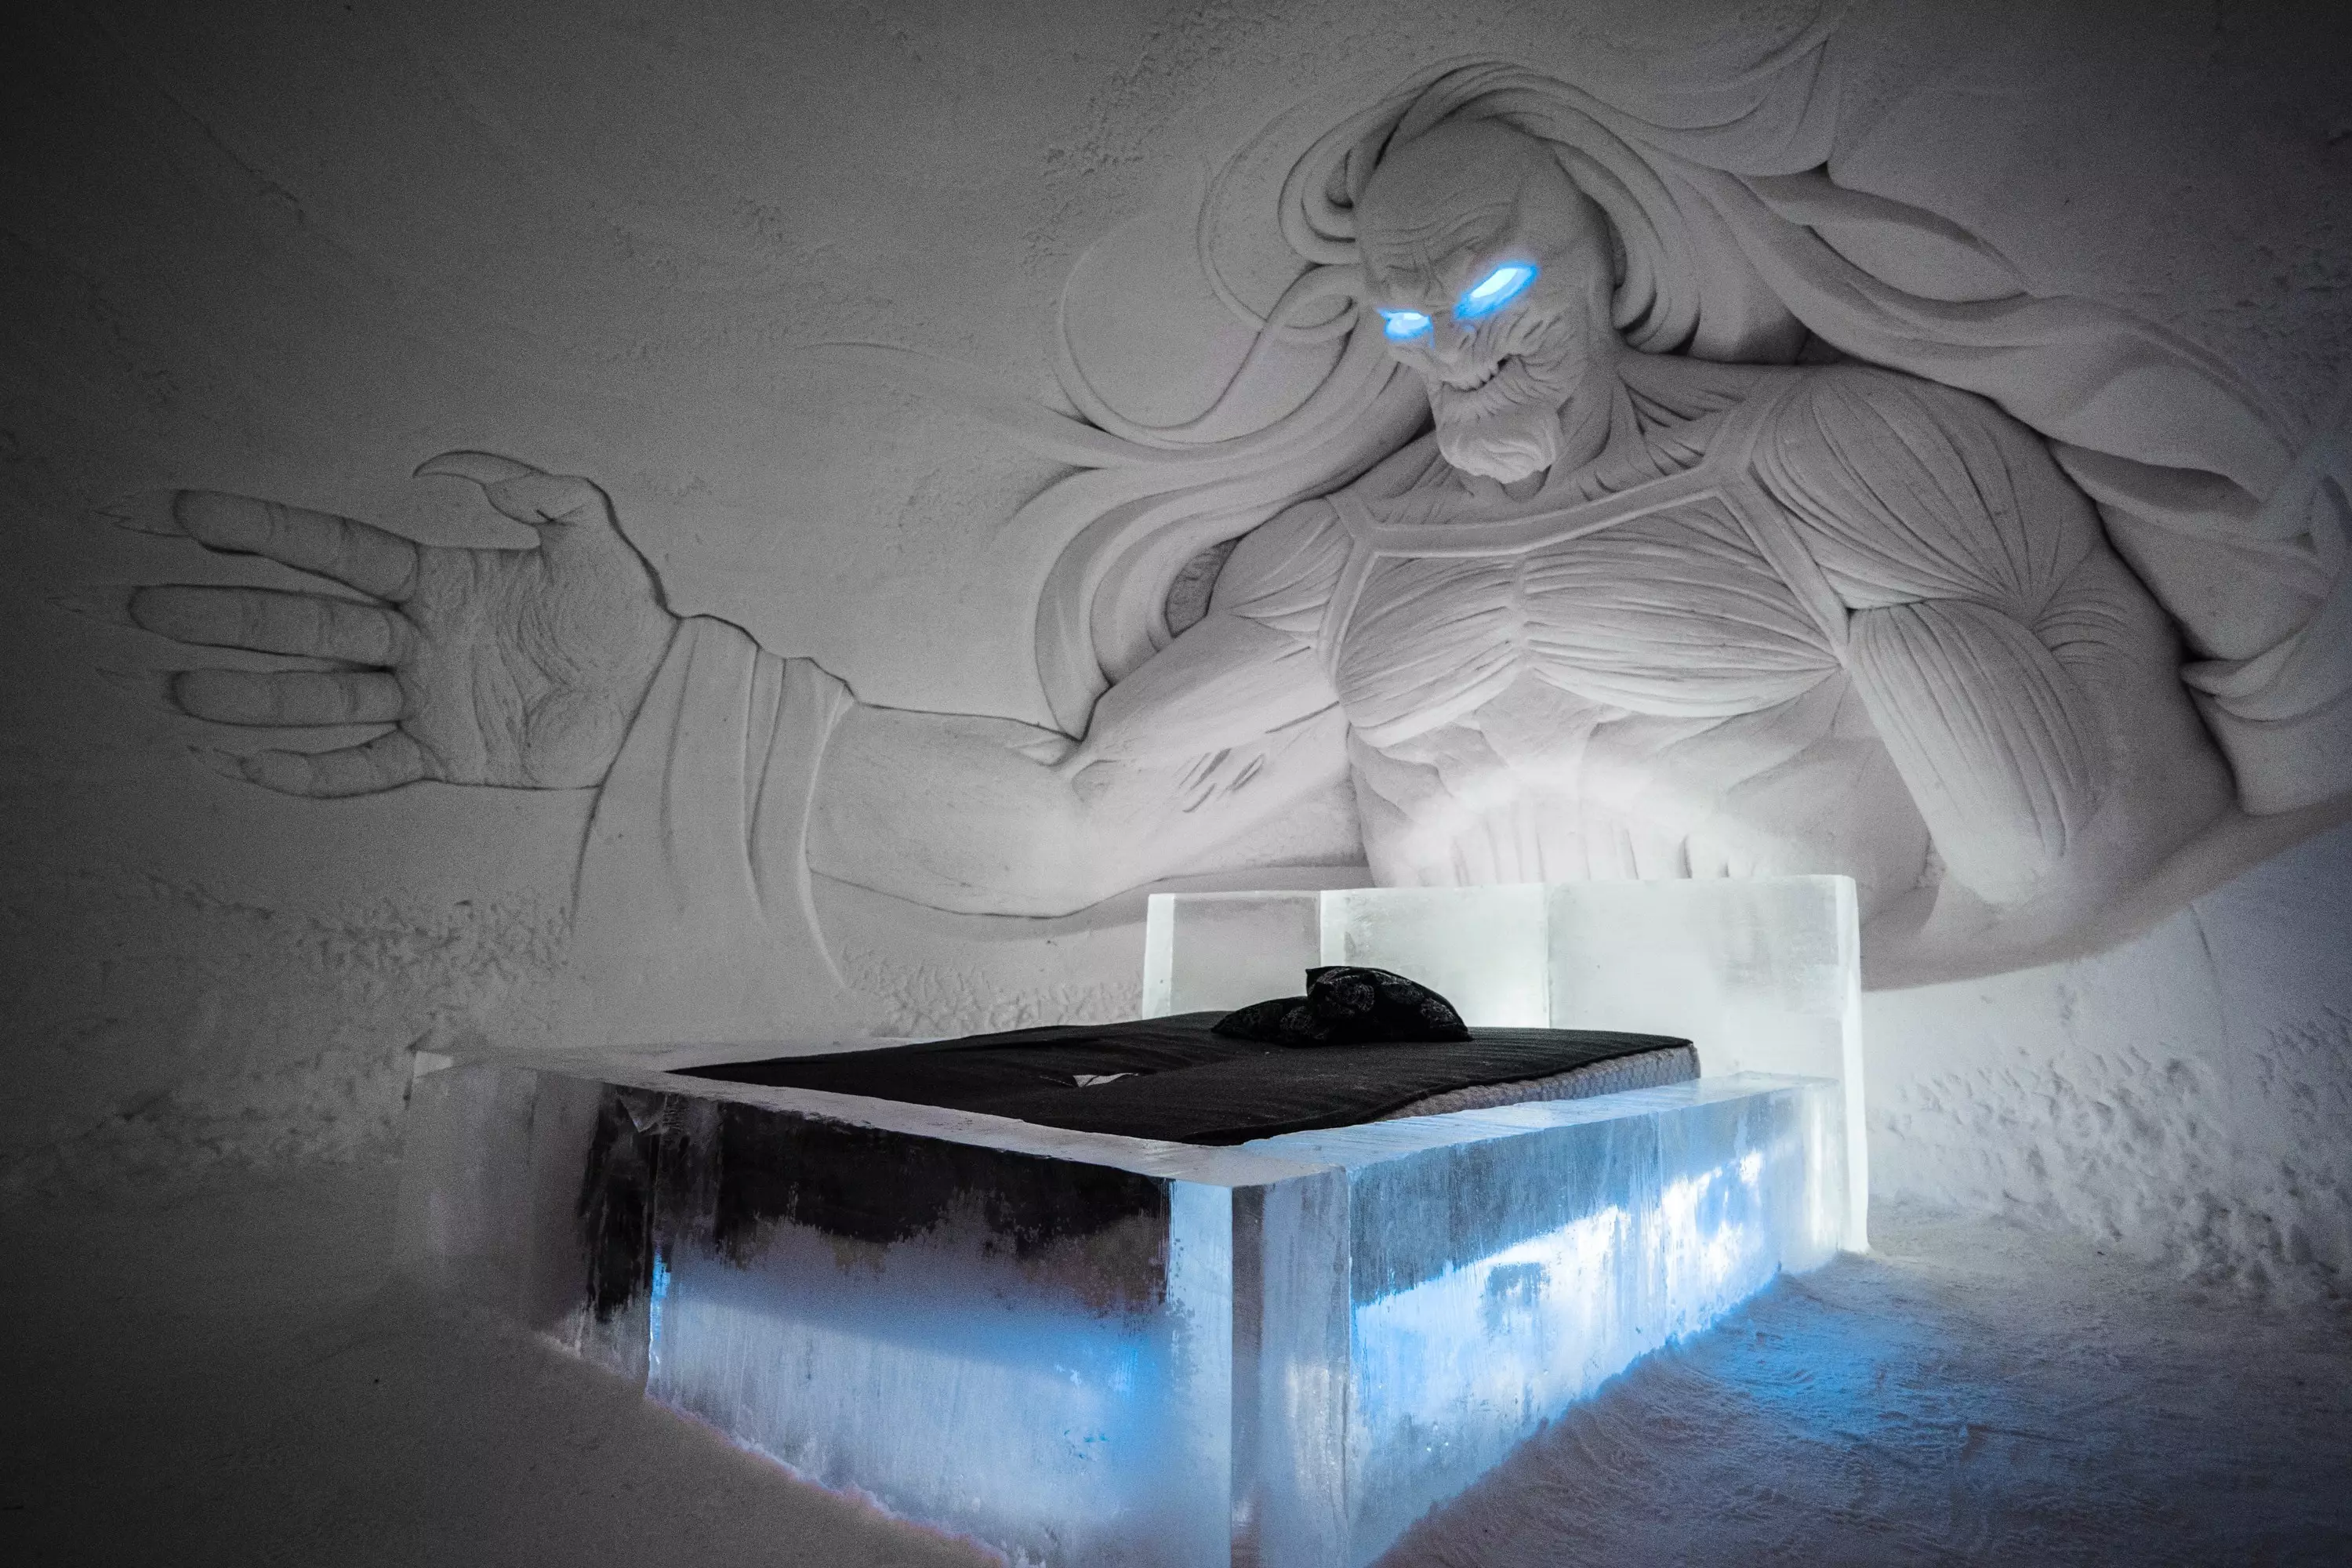 The beds are made from ice.